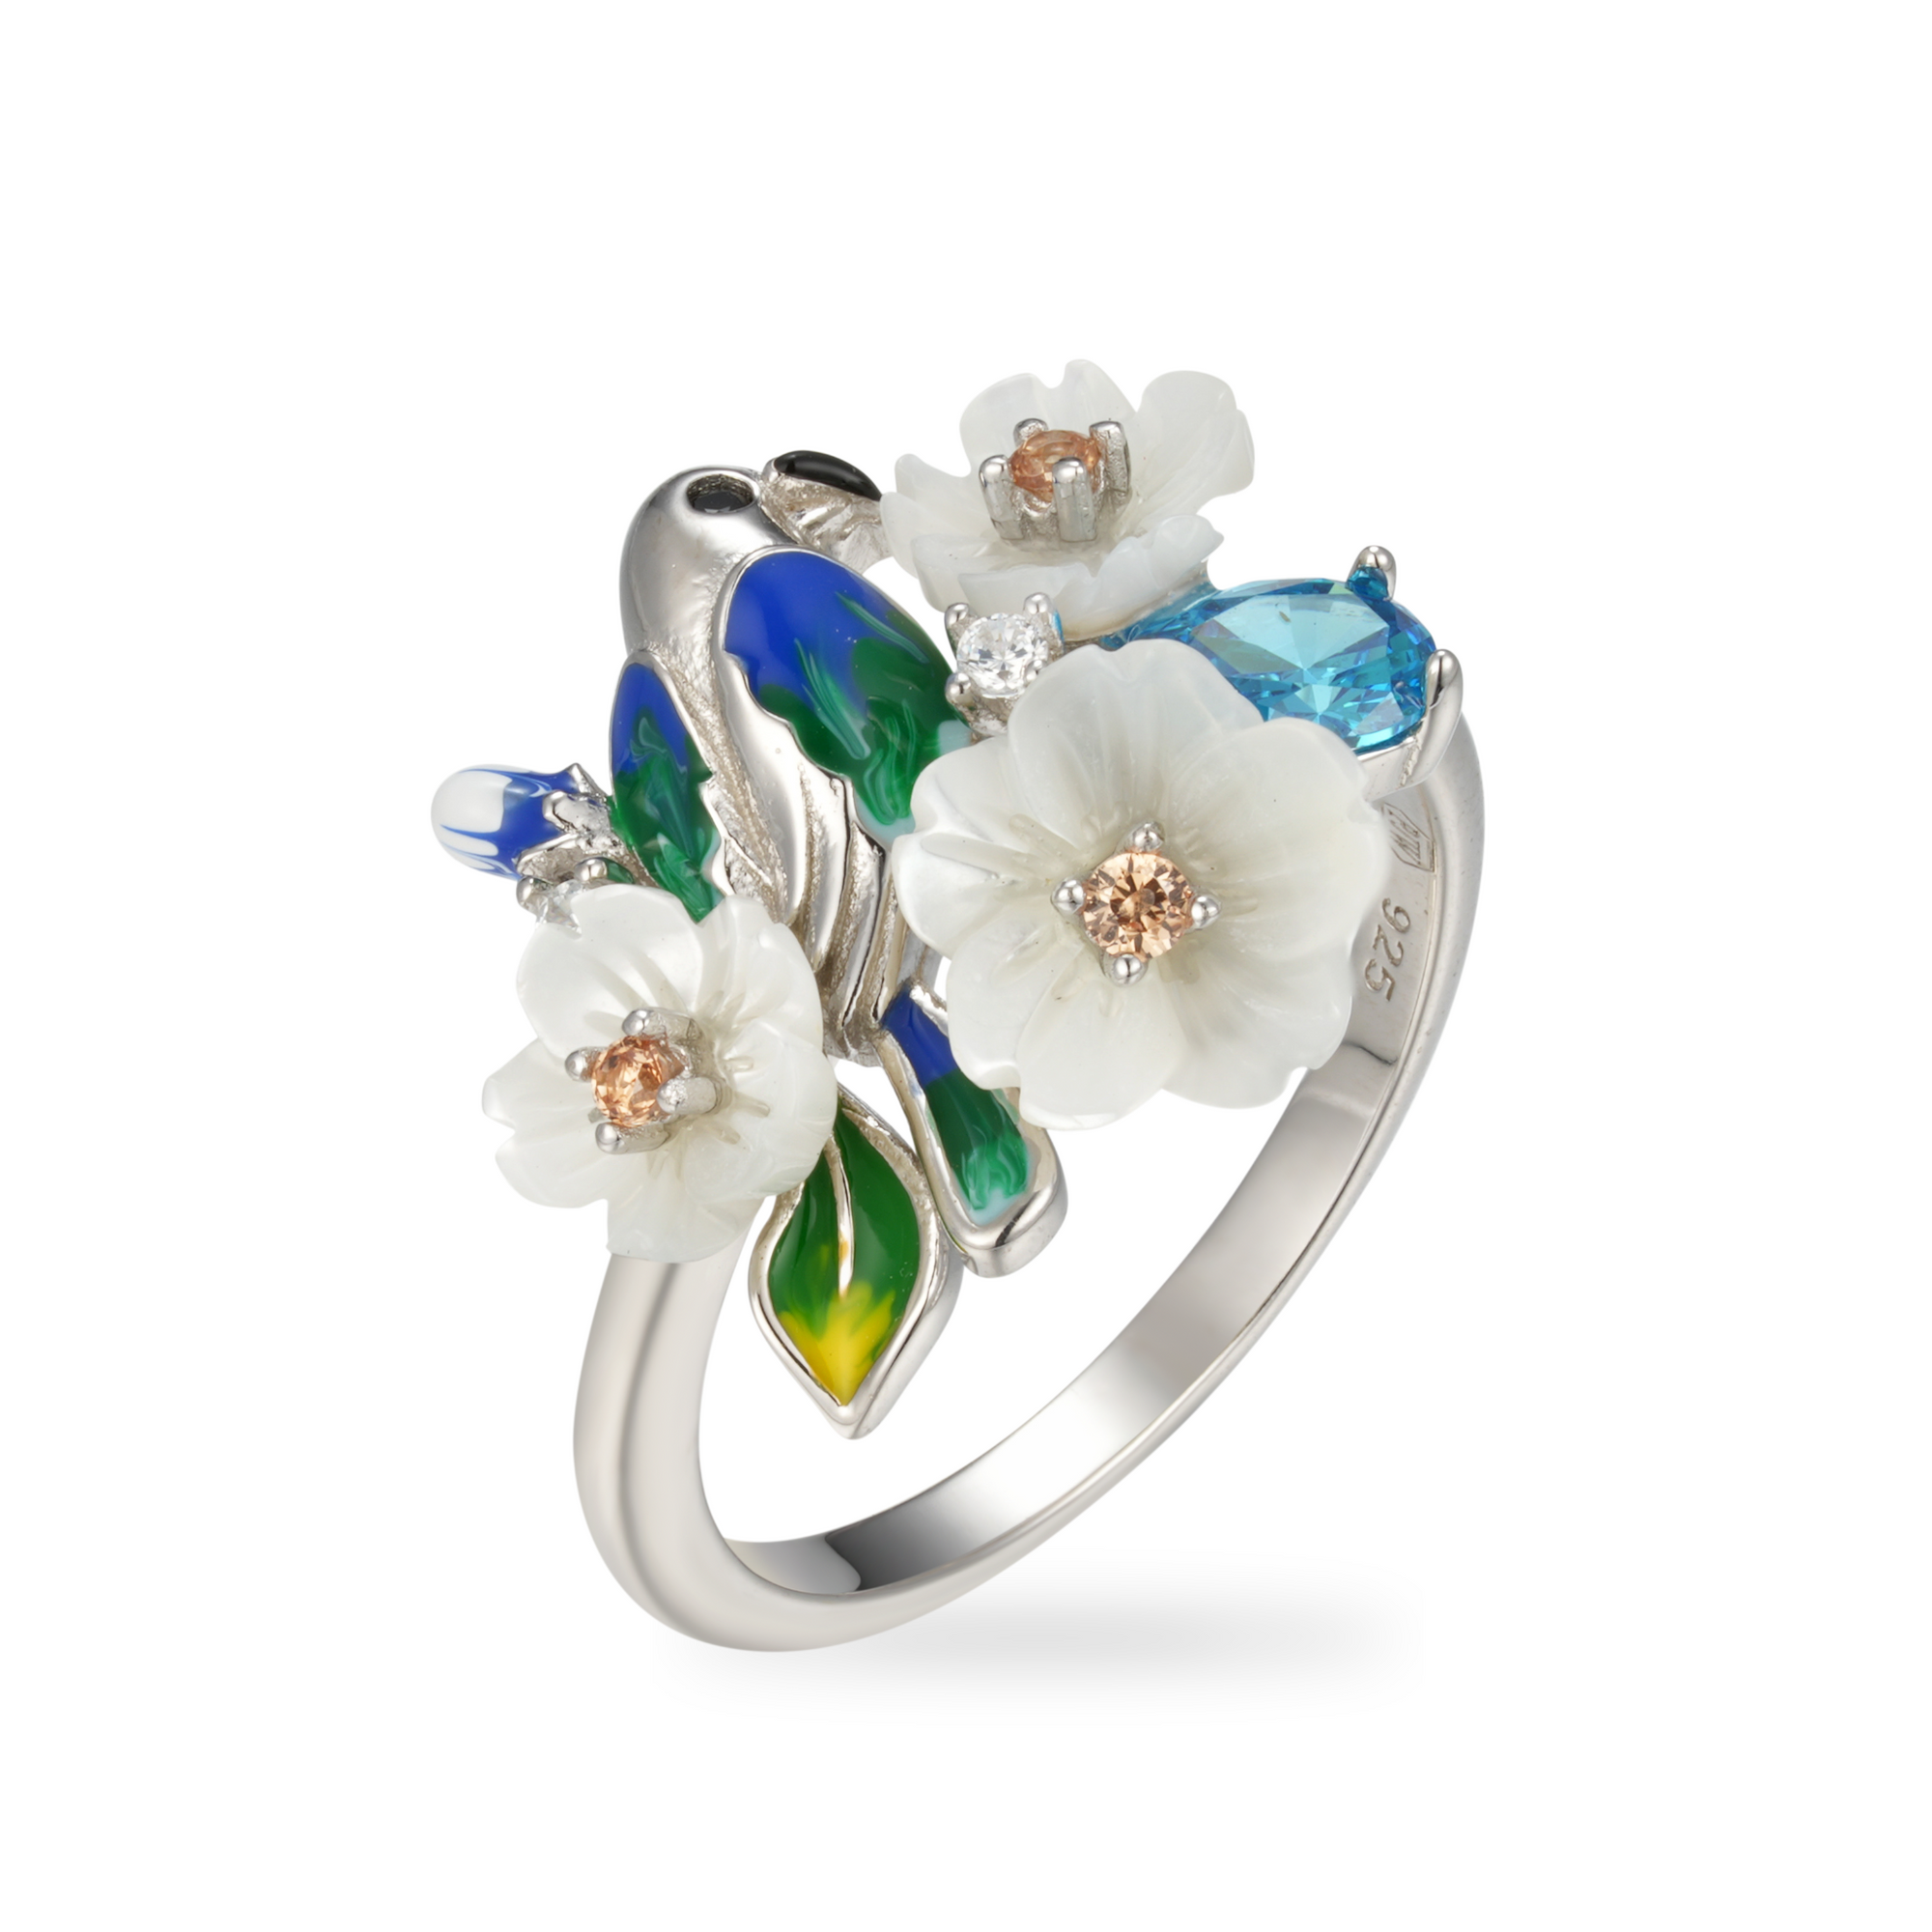 A silver ring with enamel, shell flowers, blue stones and a bird charm.